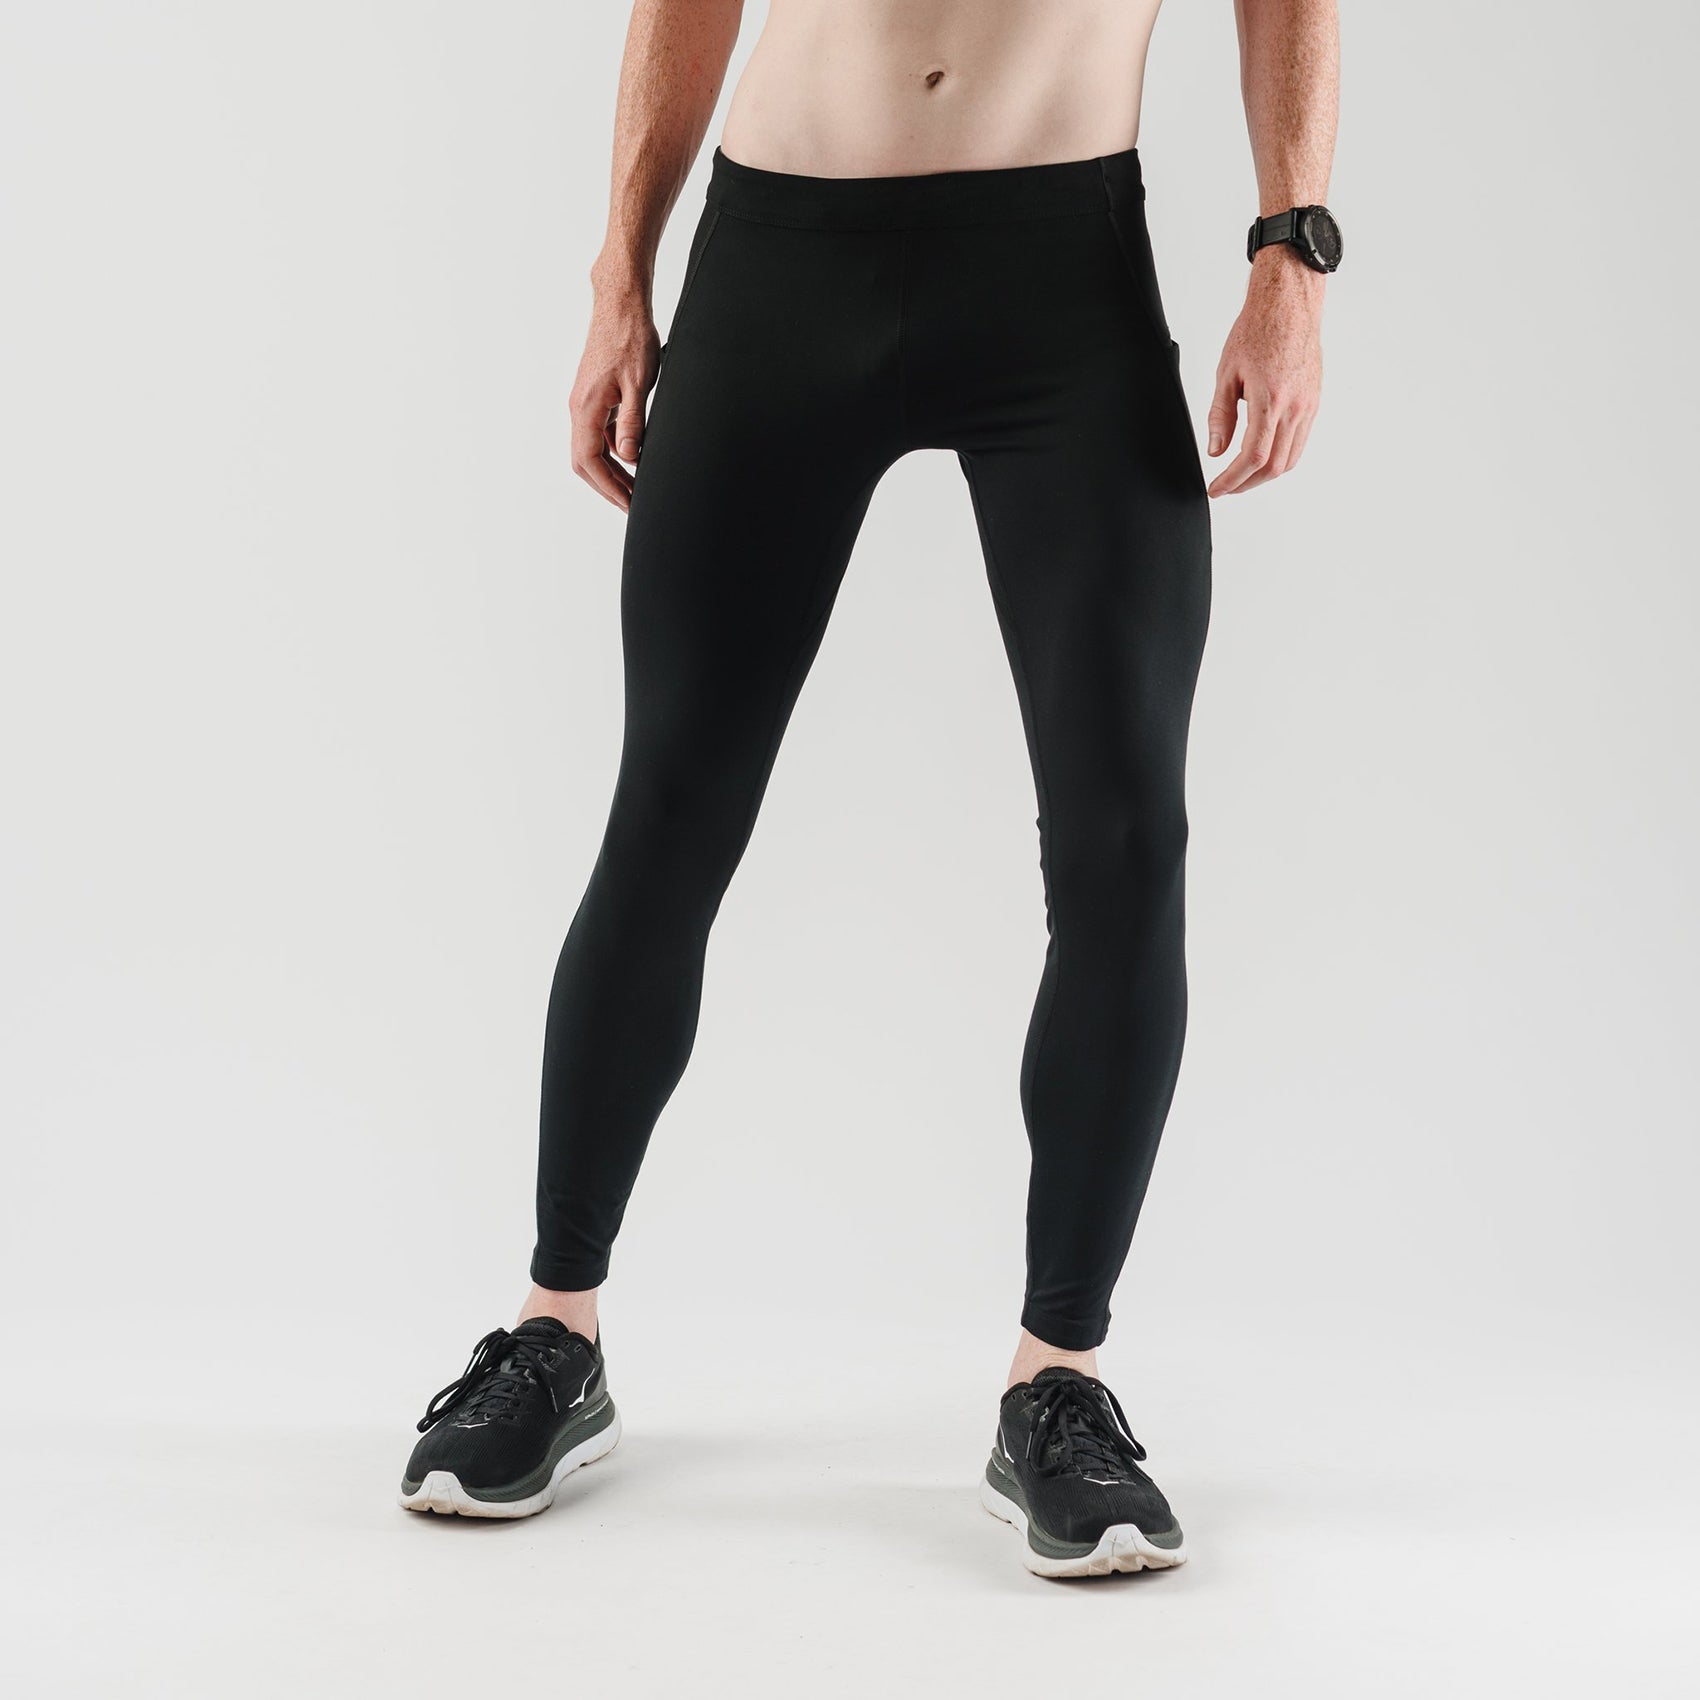 Men's 2 in 1 Running Pants Shorts with Pockets Gym Short Compression Tights  Training Sweatpants Workout Leggings Black at  Men's Clothing store